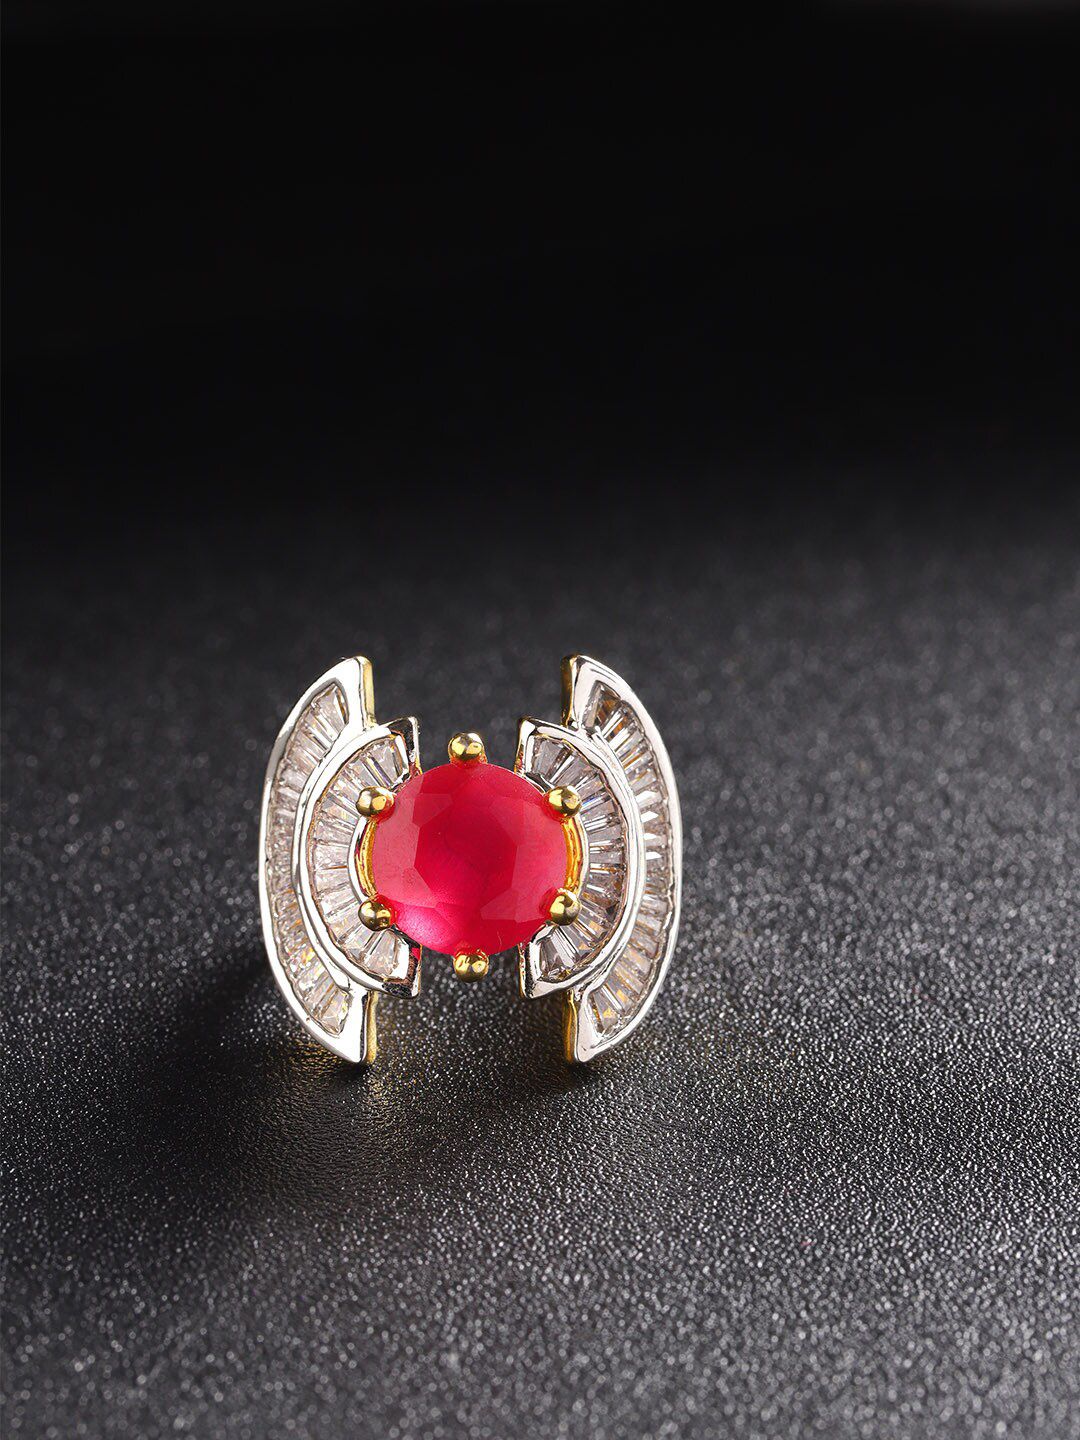 Priyaasi Gold-Plated Pink Ruby-Studded & White AD-Studded Handcrafted Finger Ring Price in India